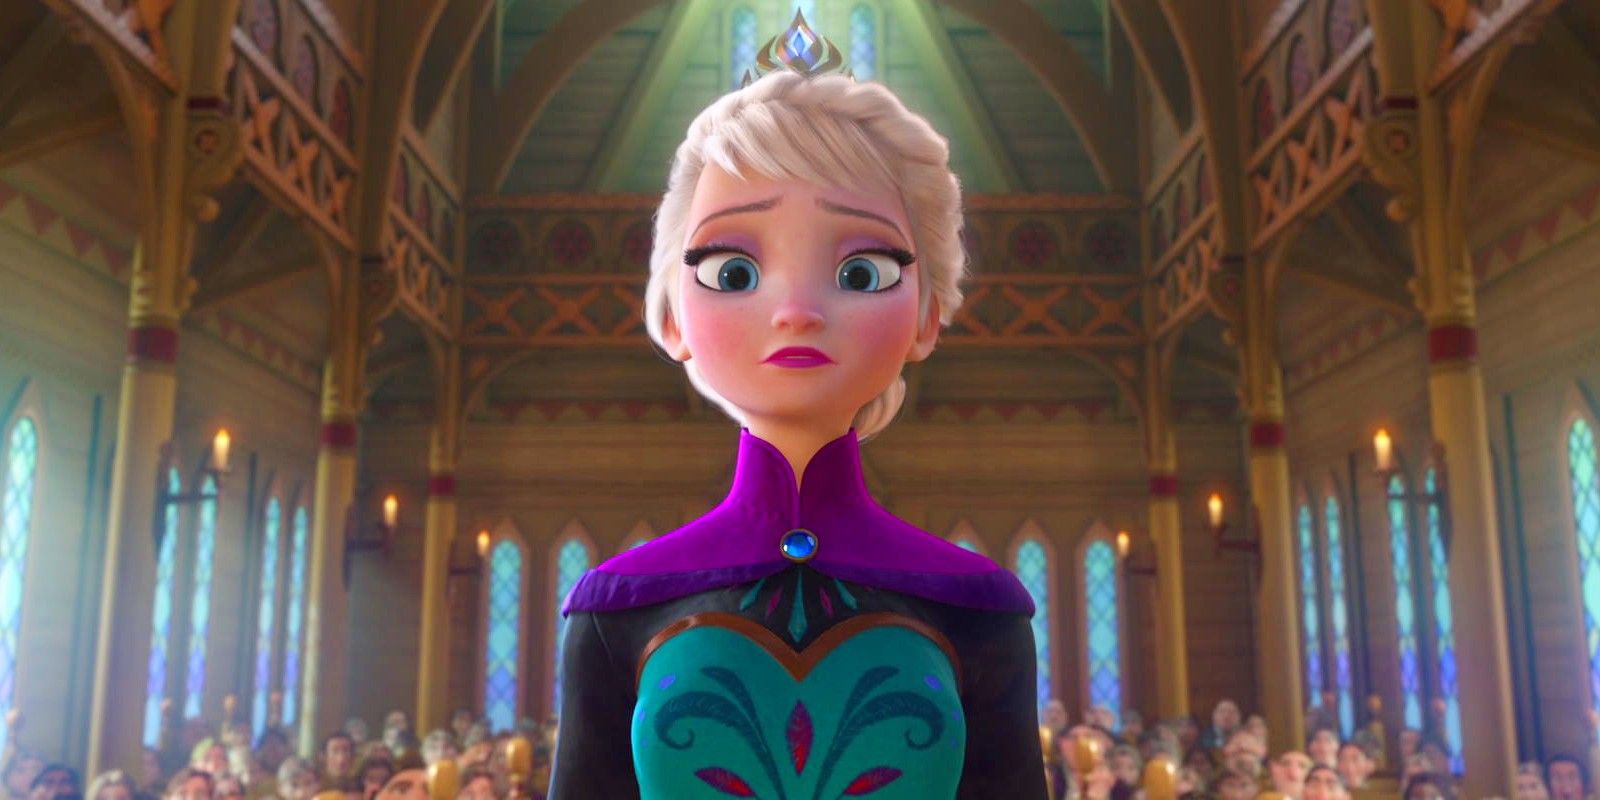 Elsa standing tall at her coronation while looking nervous in Frozen